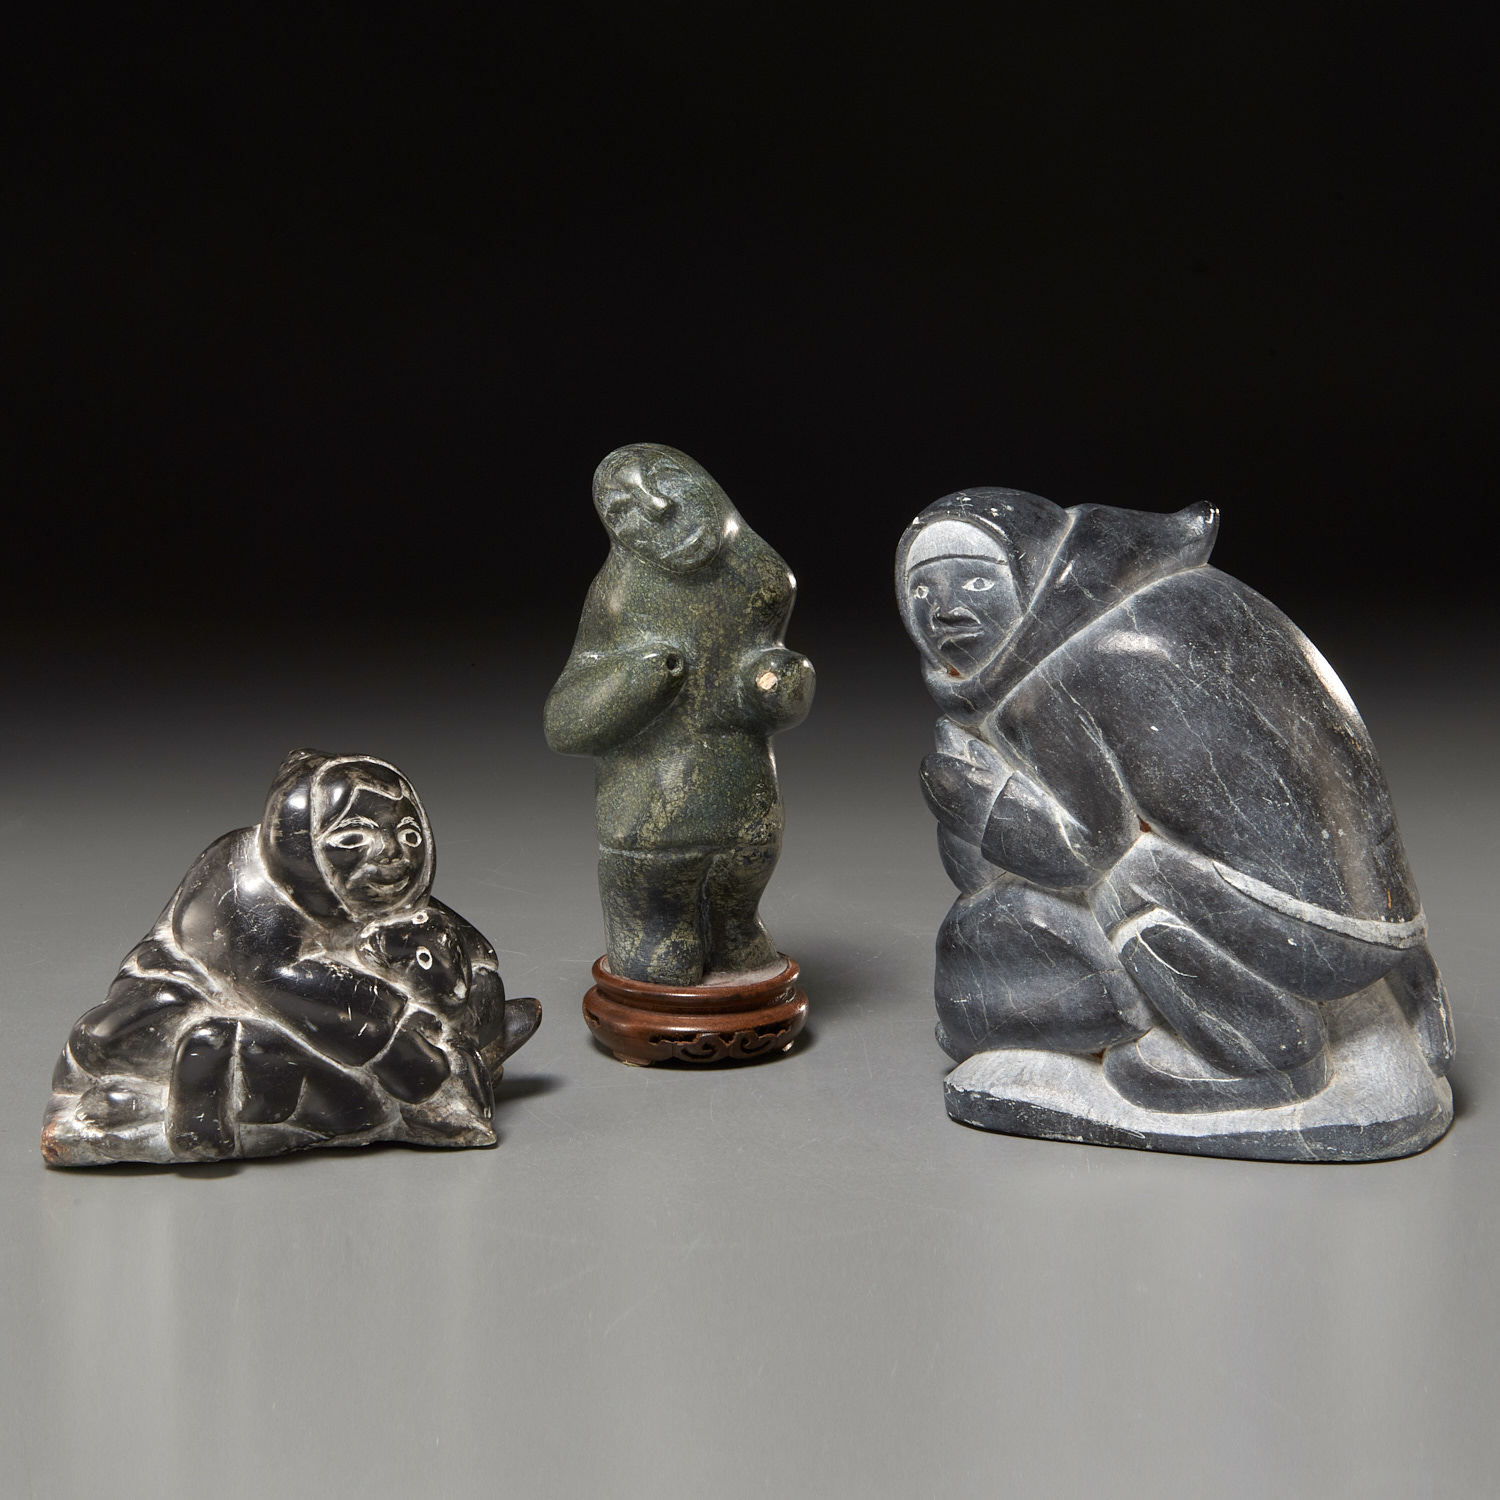  3 INUIT STONE FIGURES INCL  2cecb8